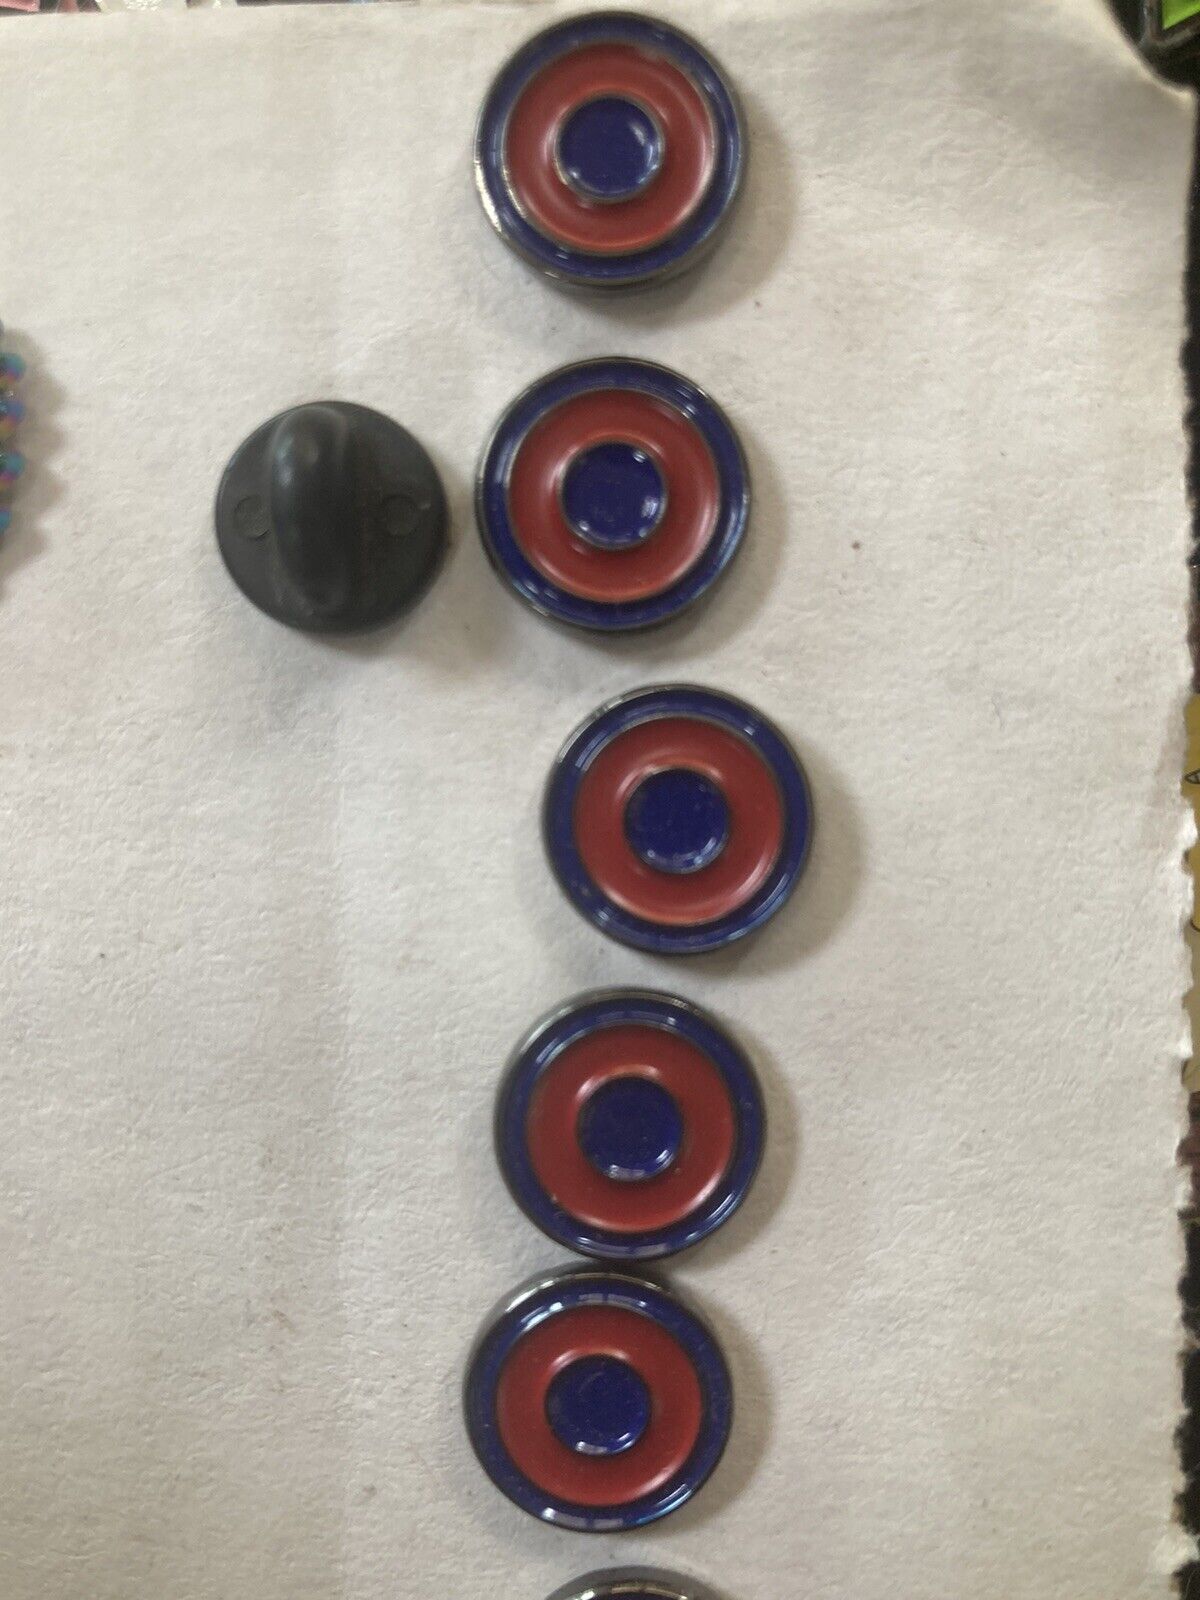 5 mini phish red and blue donut pins